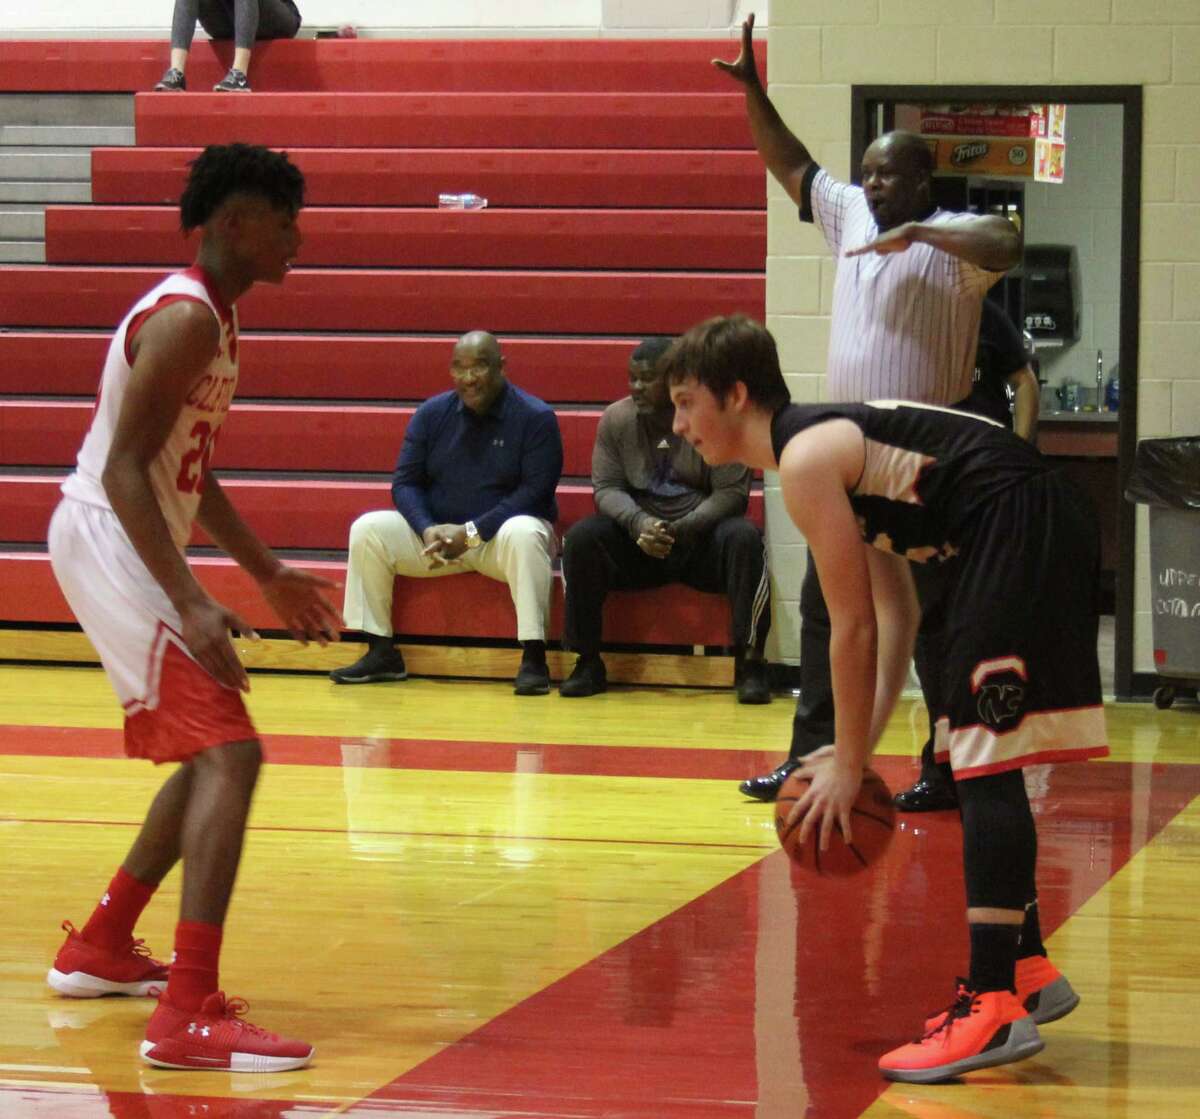 Chance Brown (left) of the Cleveland Indians blocks off a Northland Christian Cougar (right) who is preparing to bring the ball back into court.